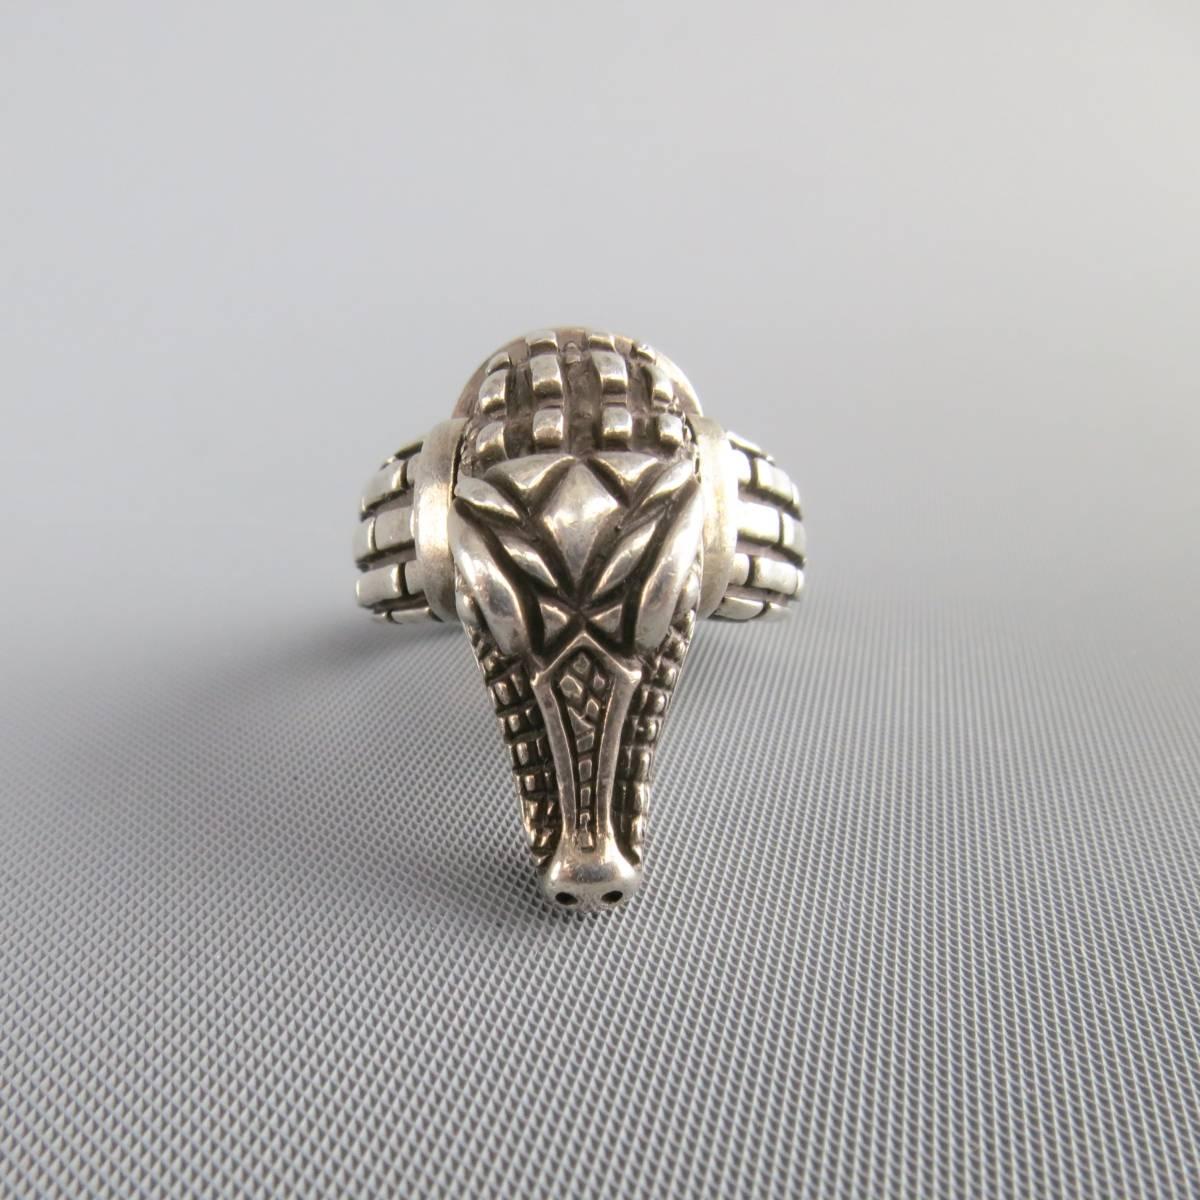 Vintage 1998 KIESELSTEIN-CORD ring in sterling silver featuring an engraved alligator crocodile head.
 
Excellent Pre-Owned Condition.
 
Size: 9
